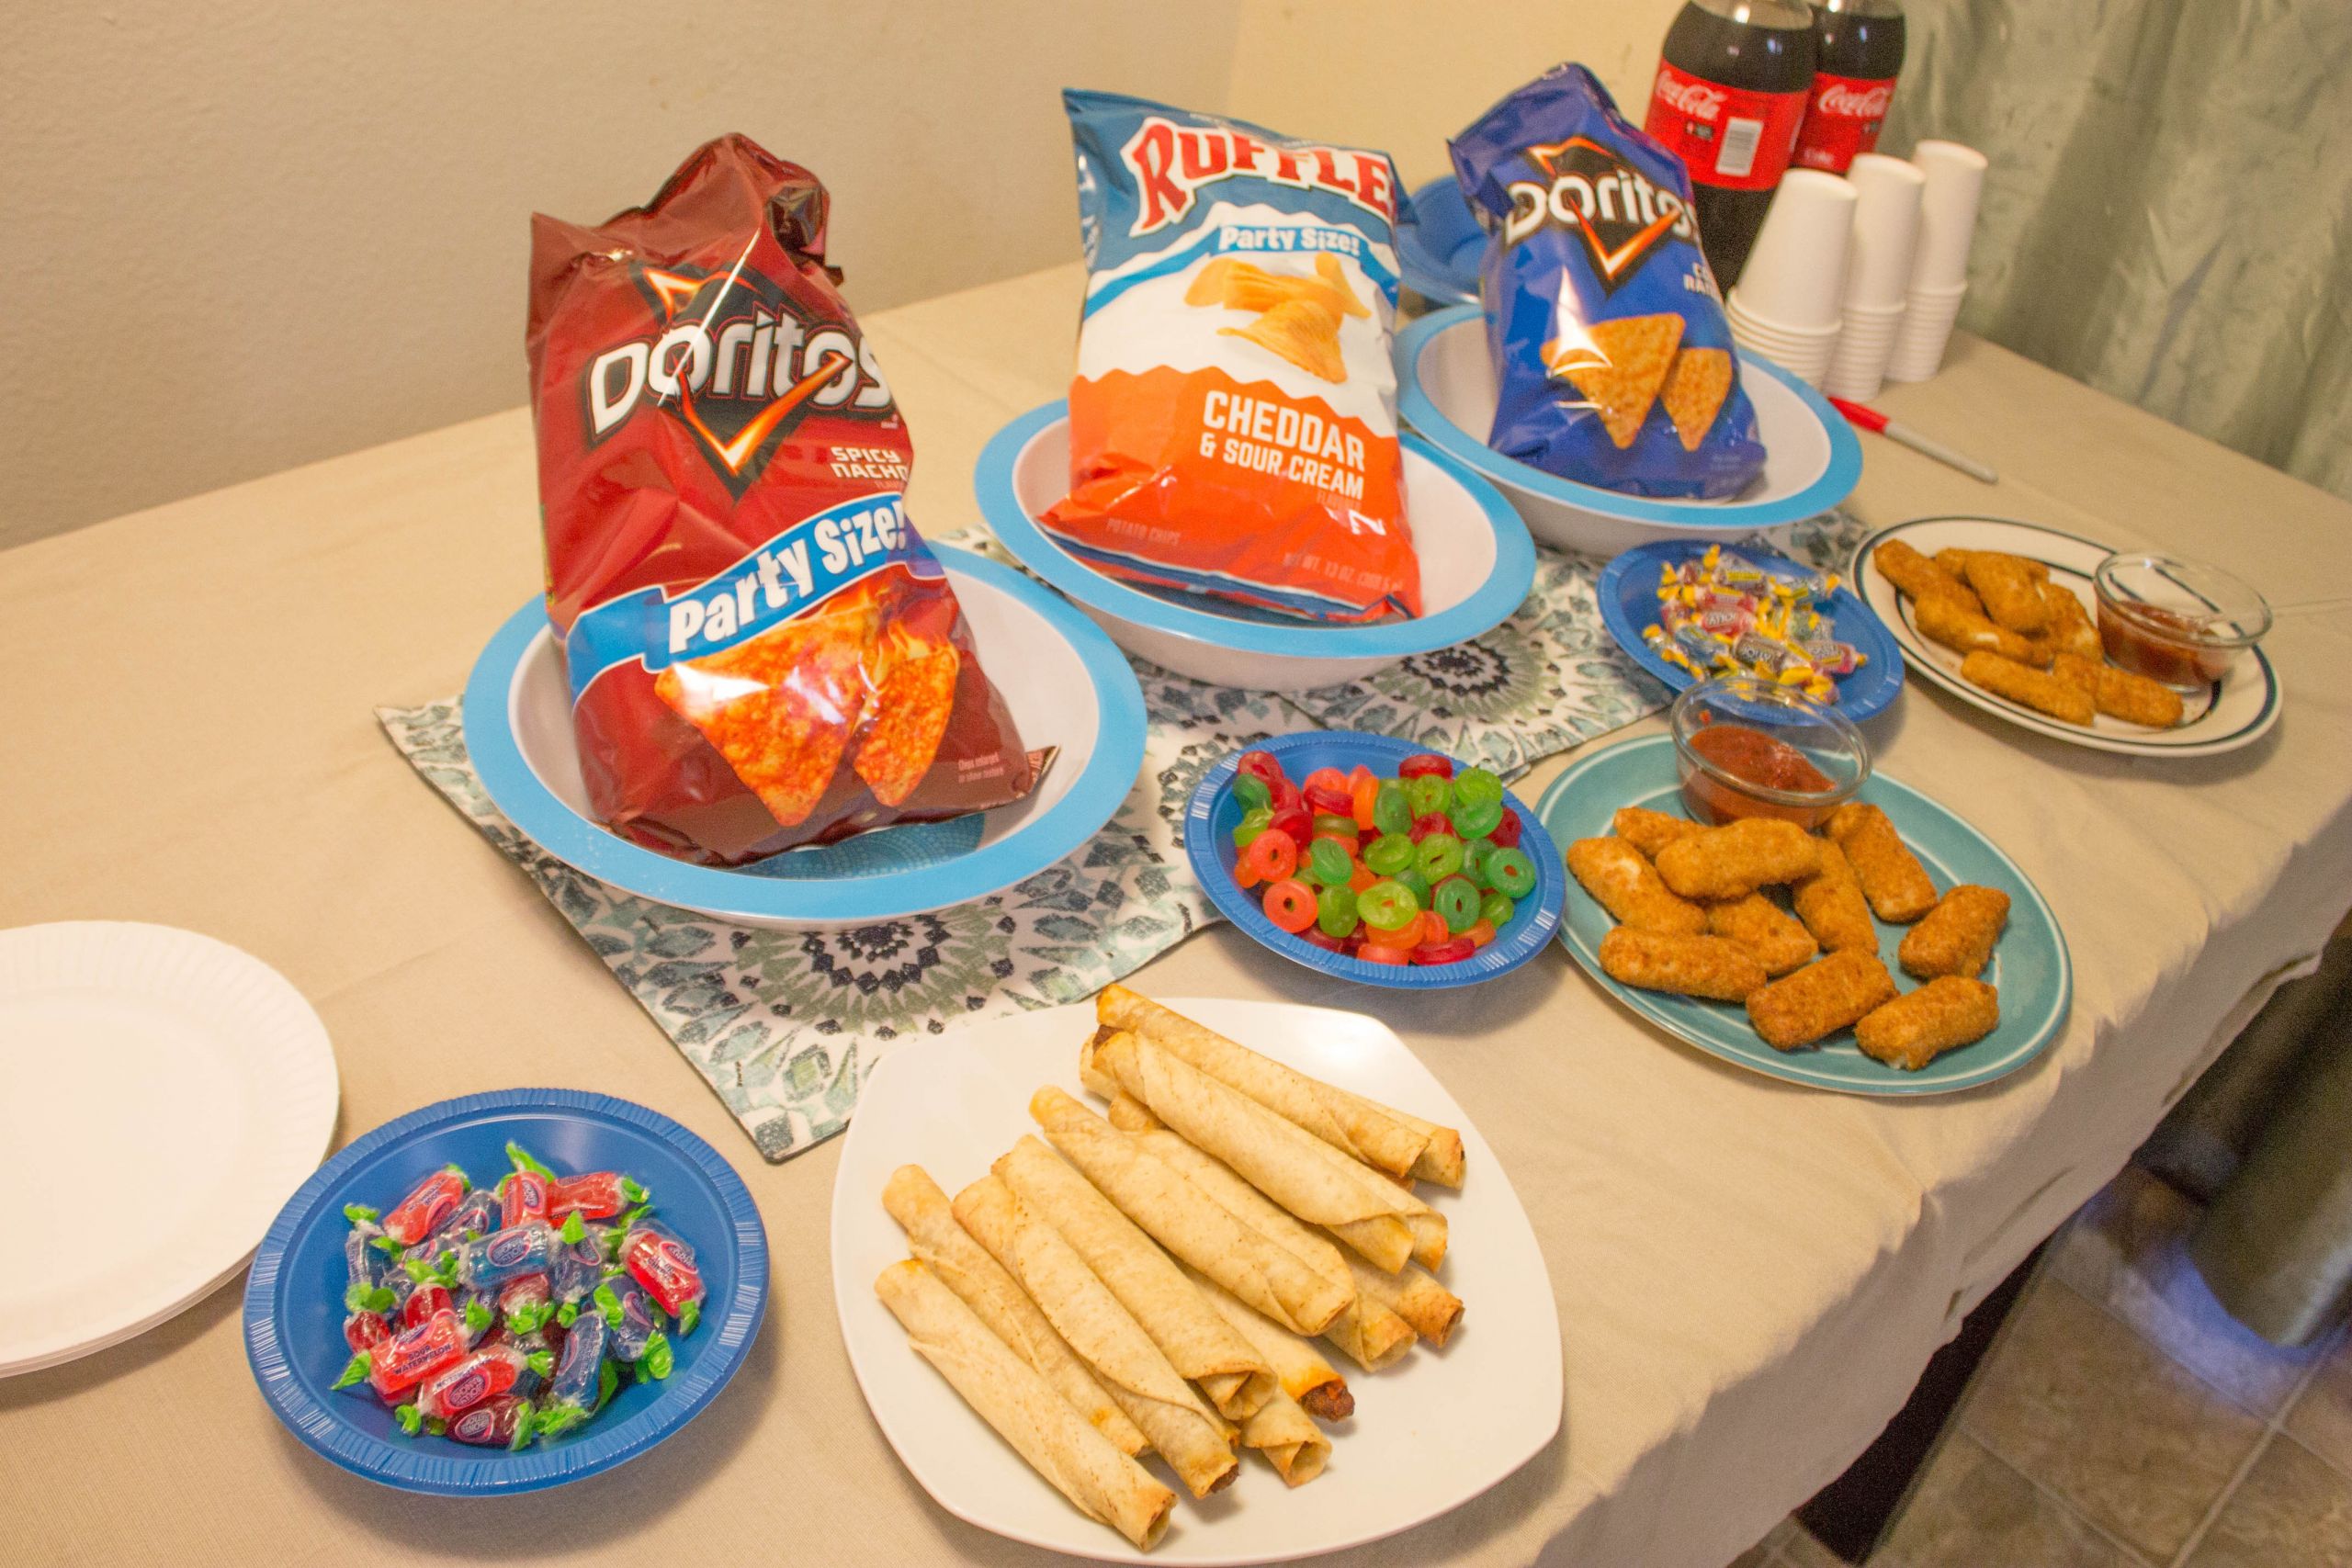 Party Food Ideas For Teens
 The Night Before His Surgery I Threw My Teen a Slumber Party